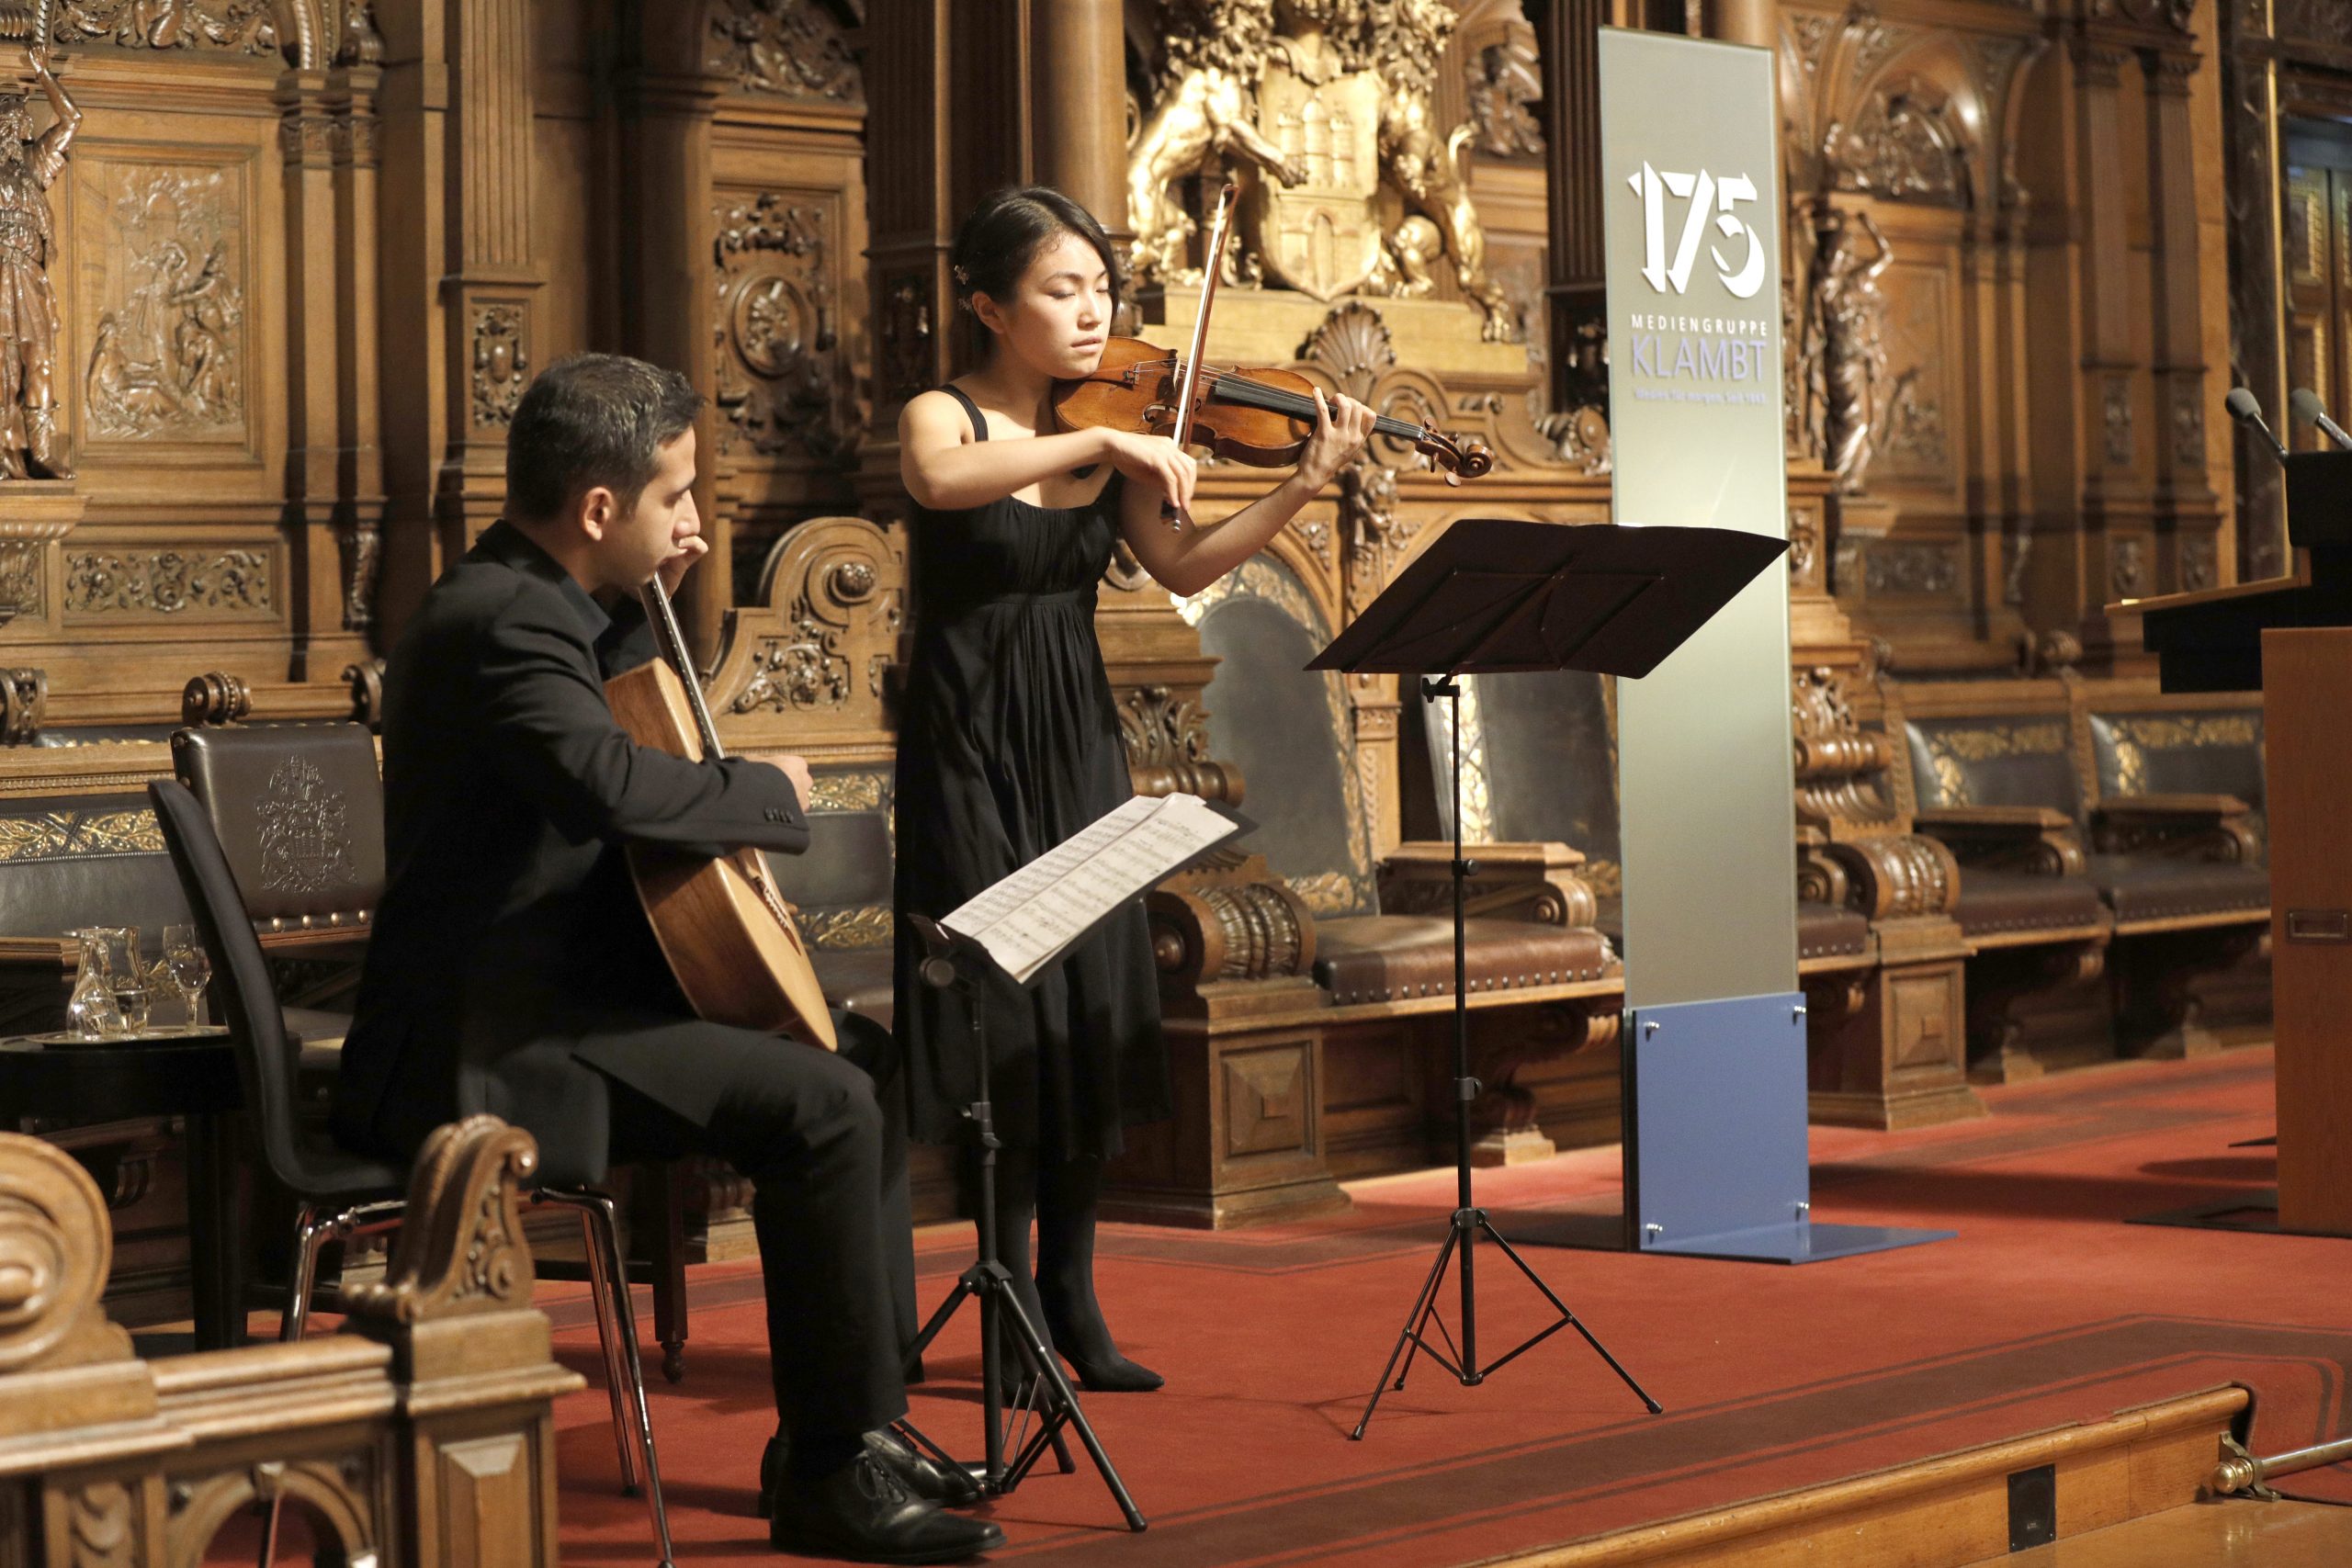 Playing duo with the violinist Anny Chen at the Senate Reception of Klambt Media Group in Festsaal of Hamburg Town Hall